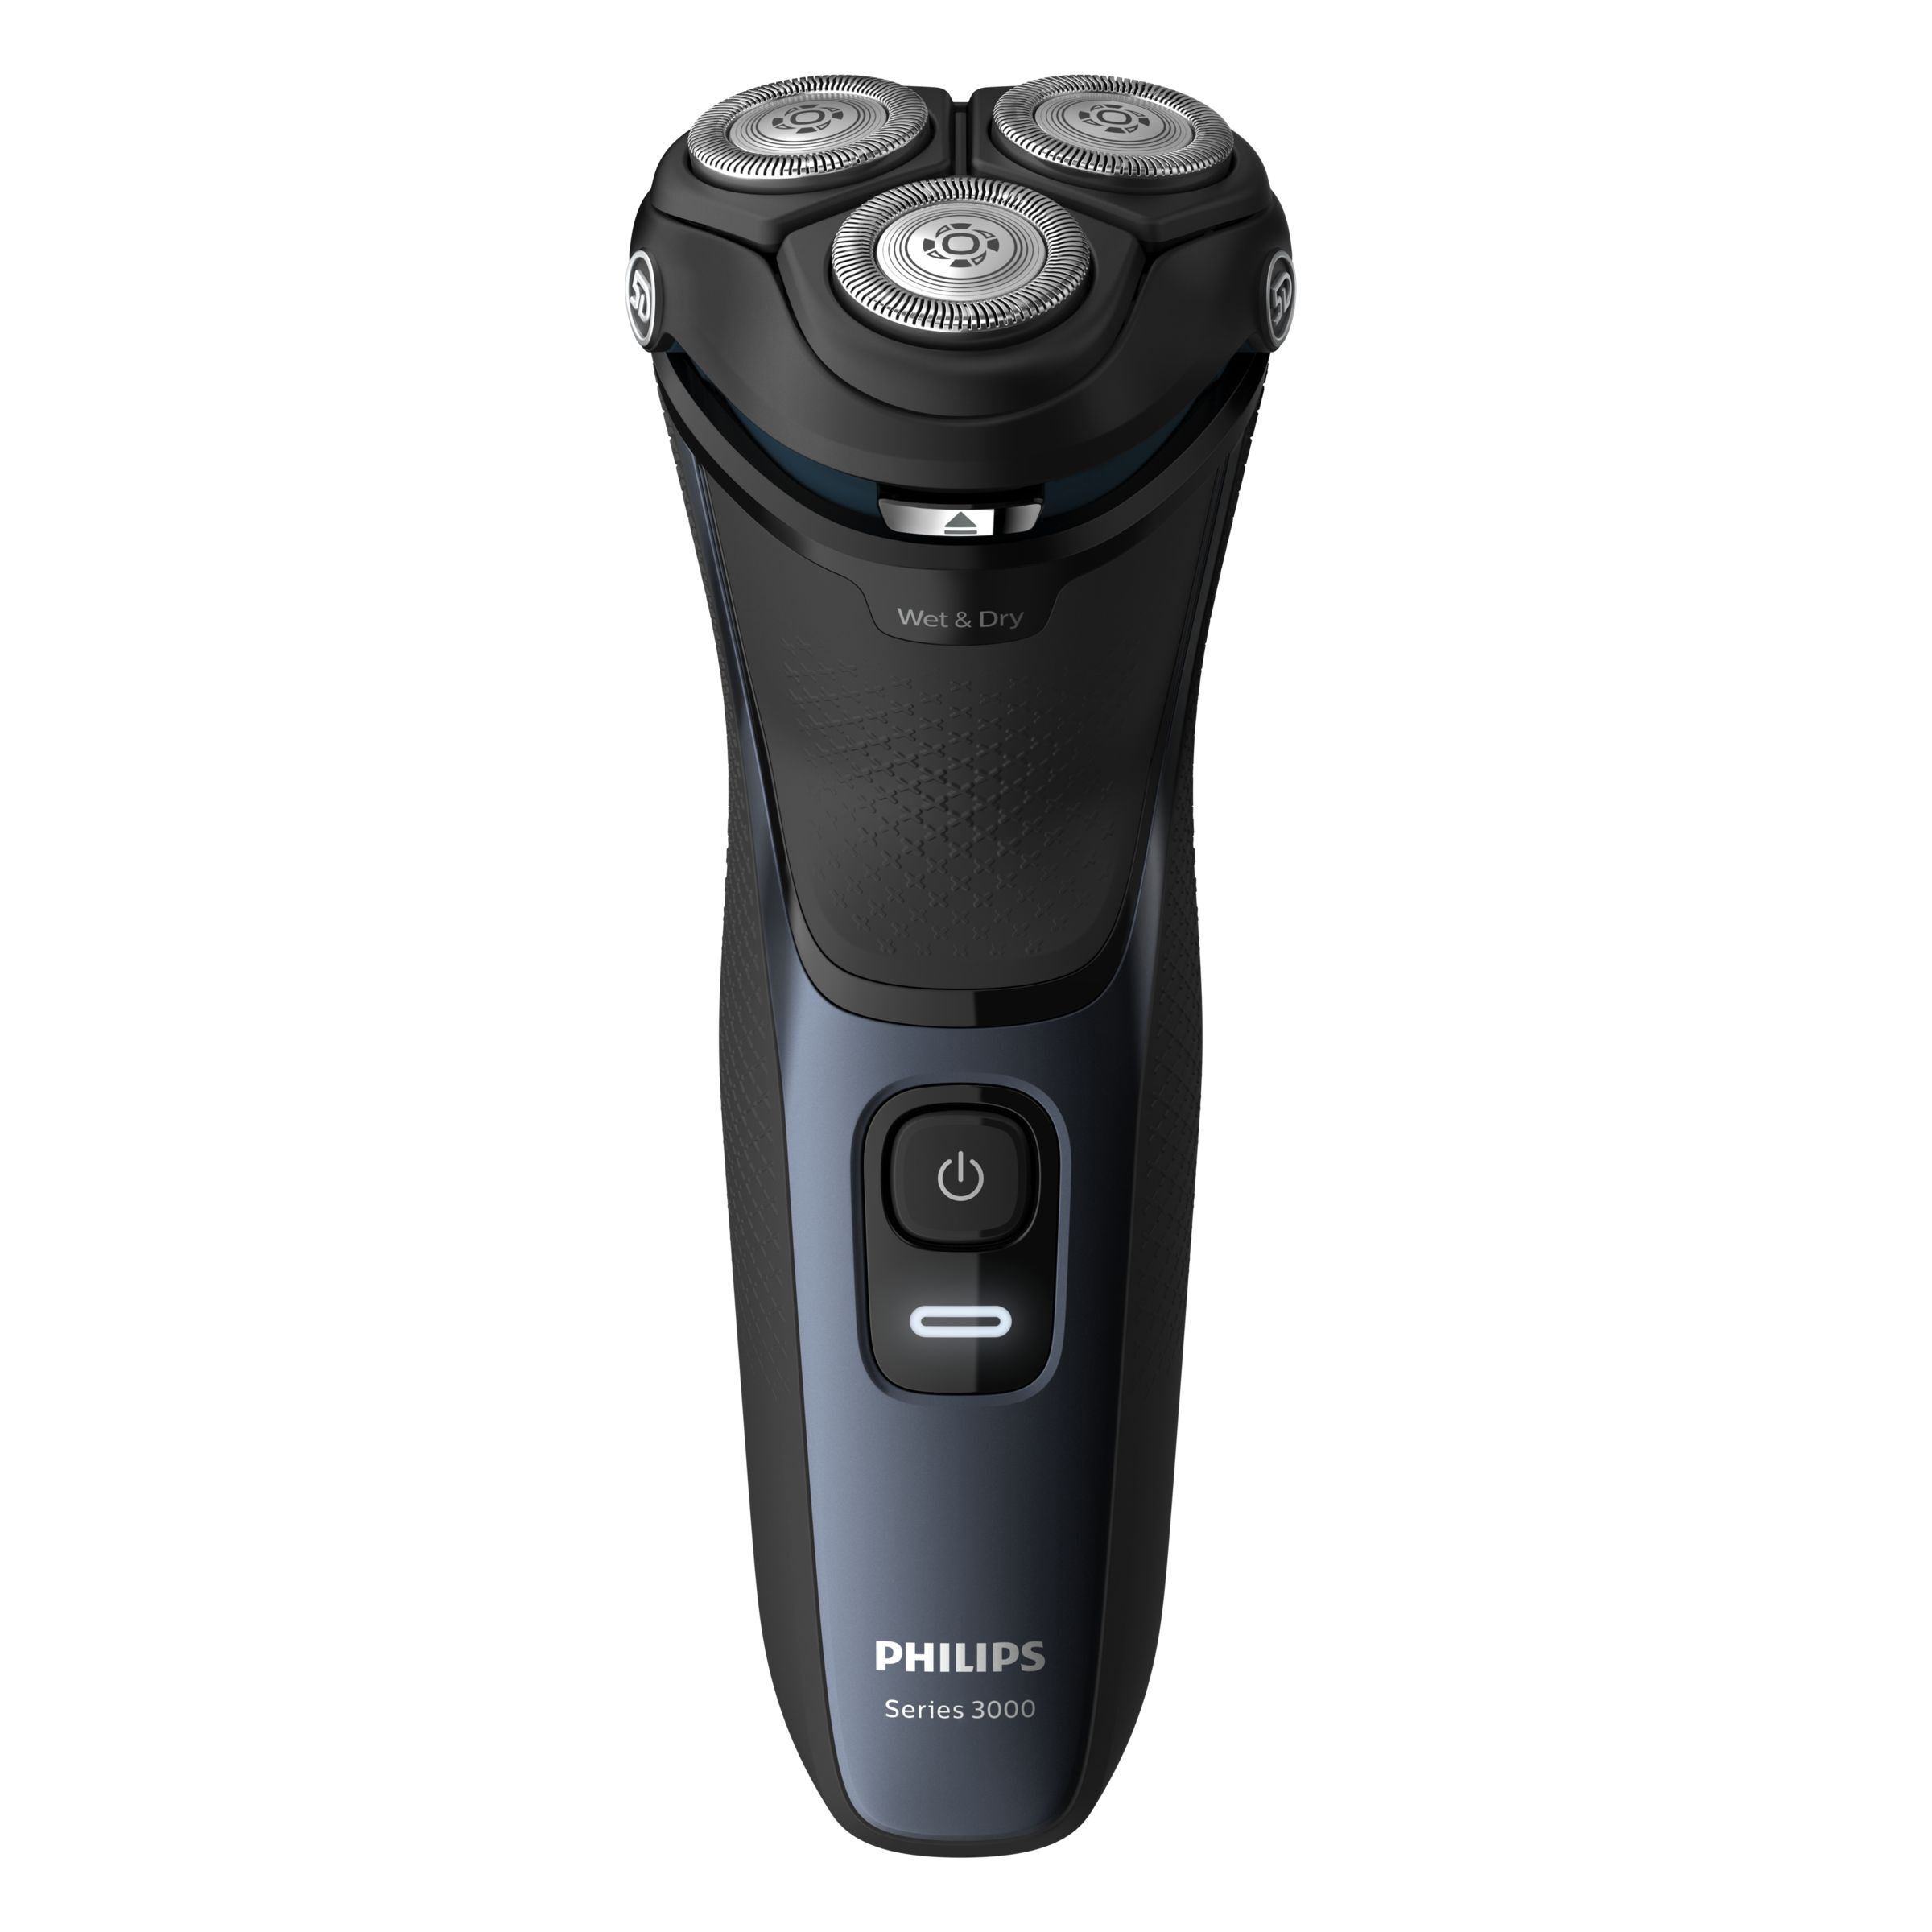 Philips Norelco Shaver 3100 S3134